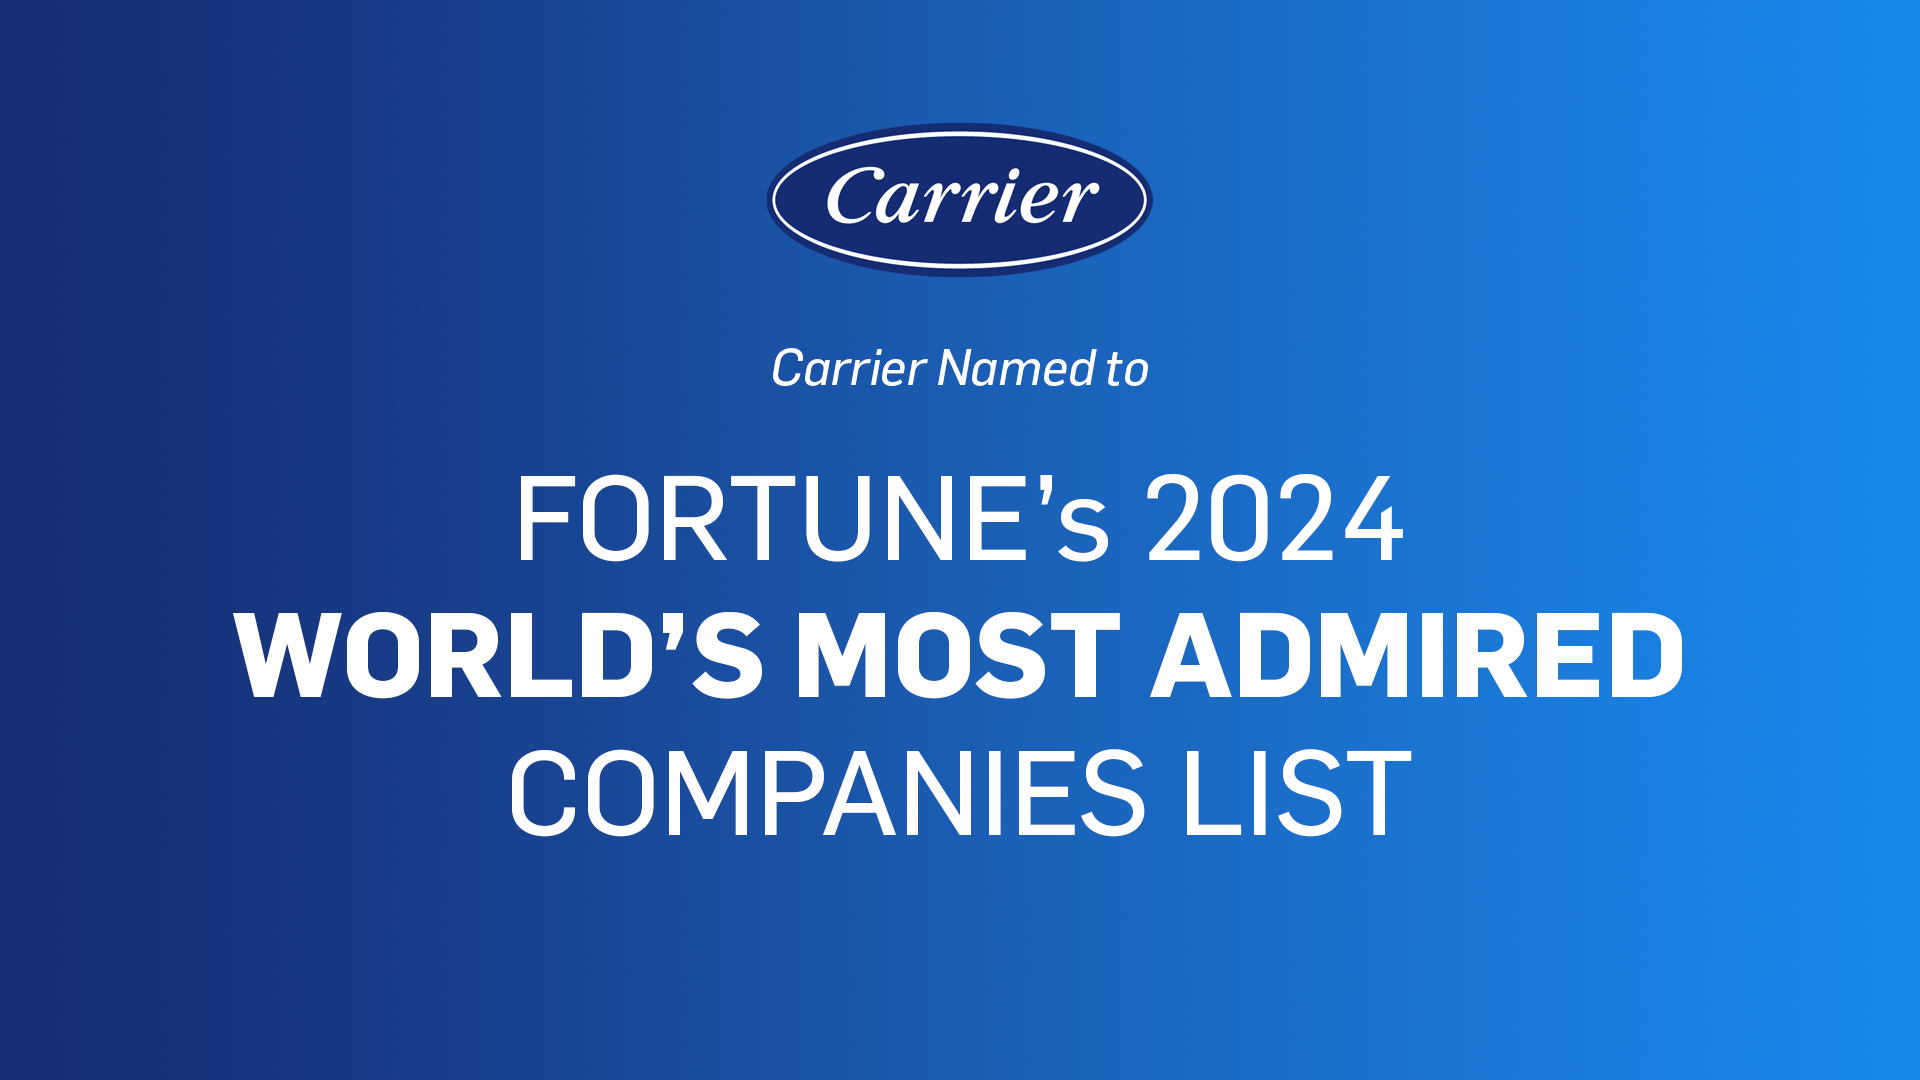 Carrier Named to Fortune’s World’s Most Admired Companies 2024 List 